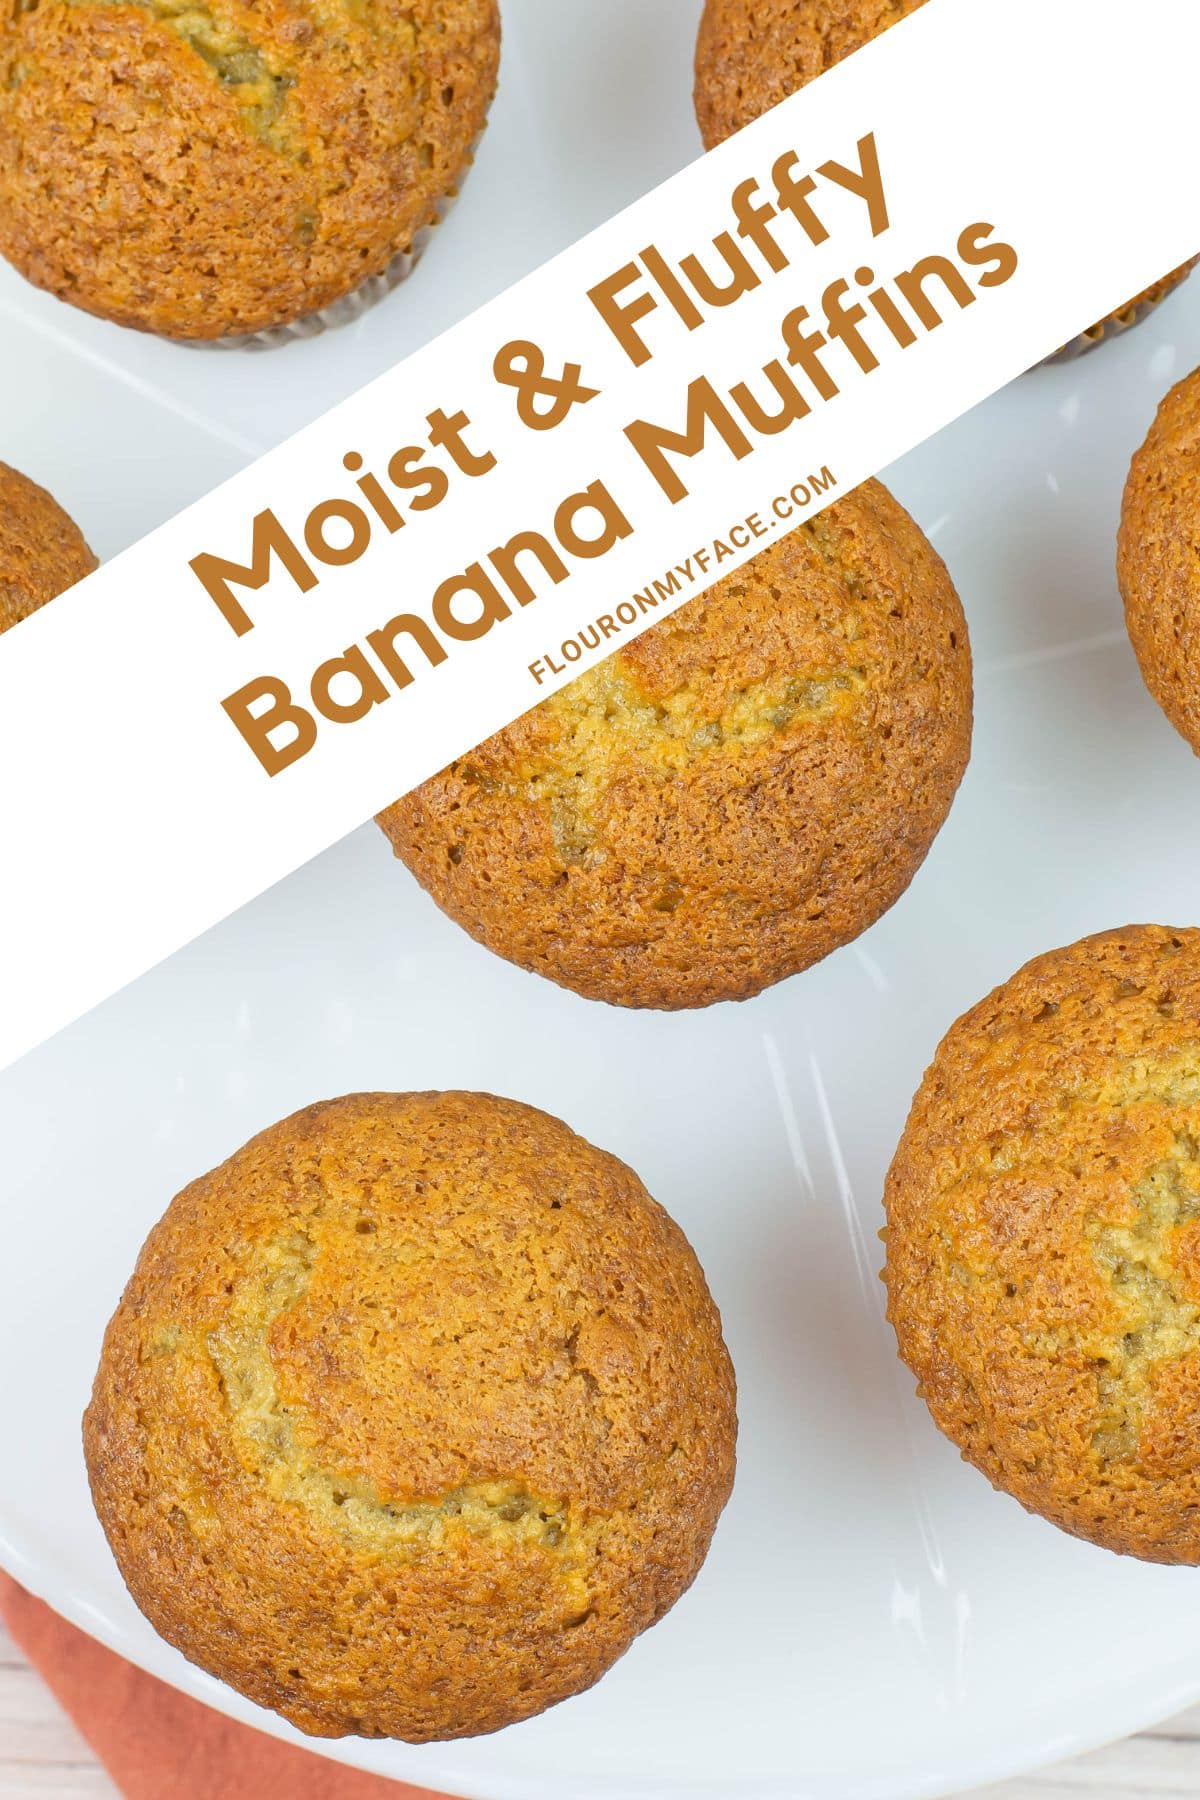 Large vertical image overhead top of banana muffins.